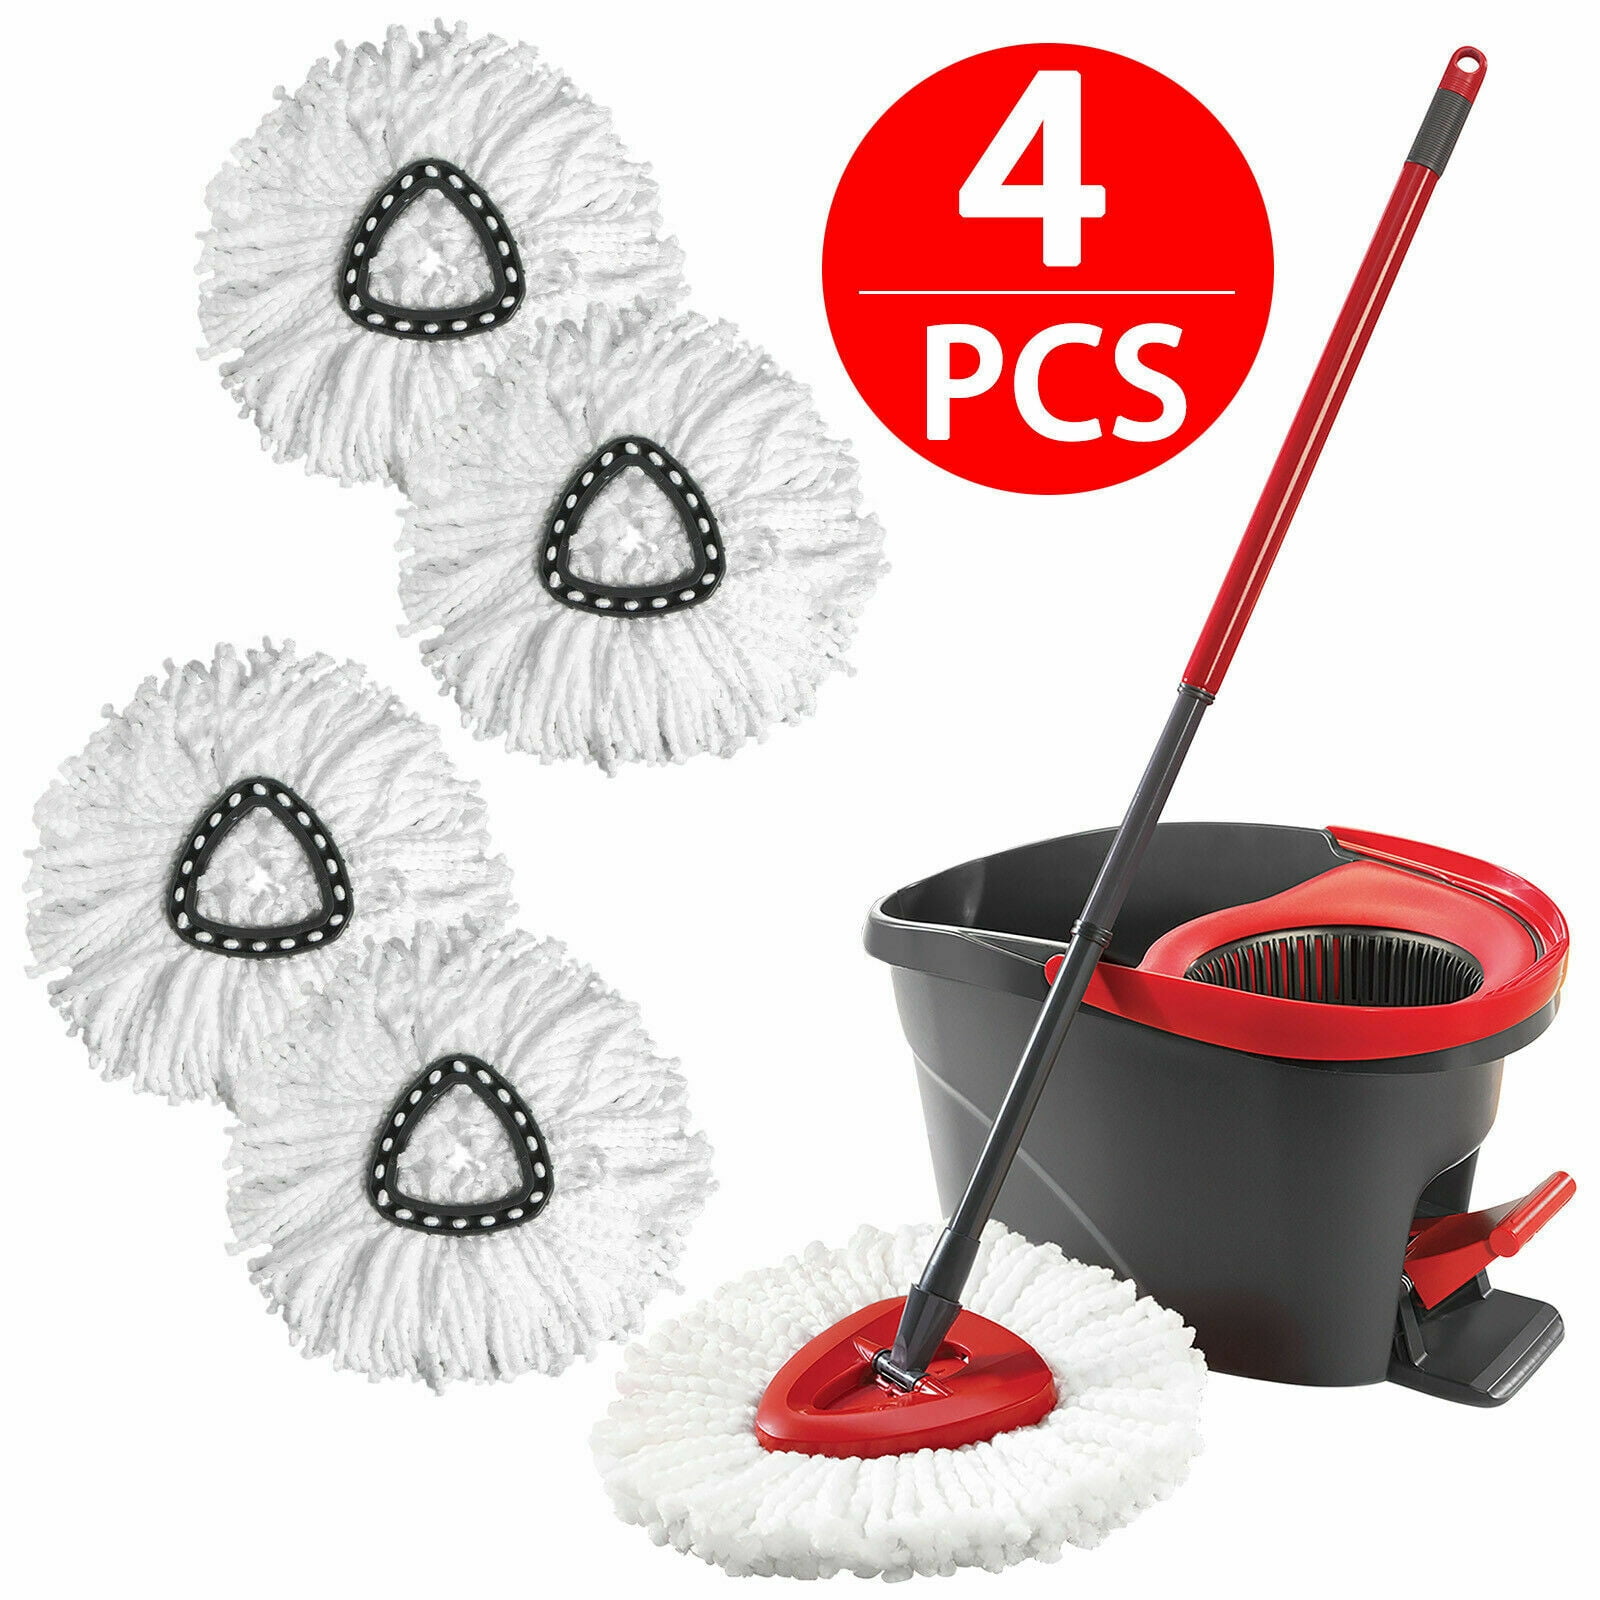 Replacement Heads Easy Cleaning Mopping Wring Spin Mop Refill Mop for O-Cedar ! 